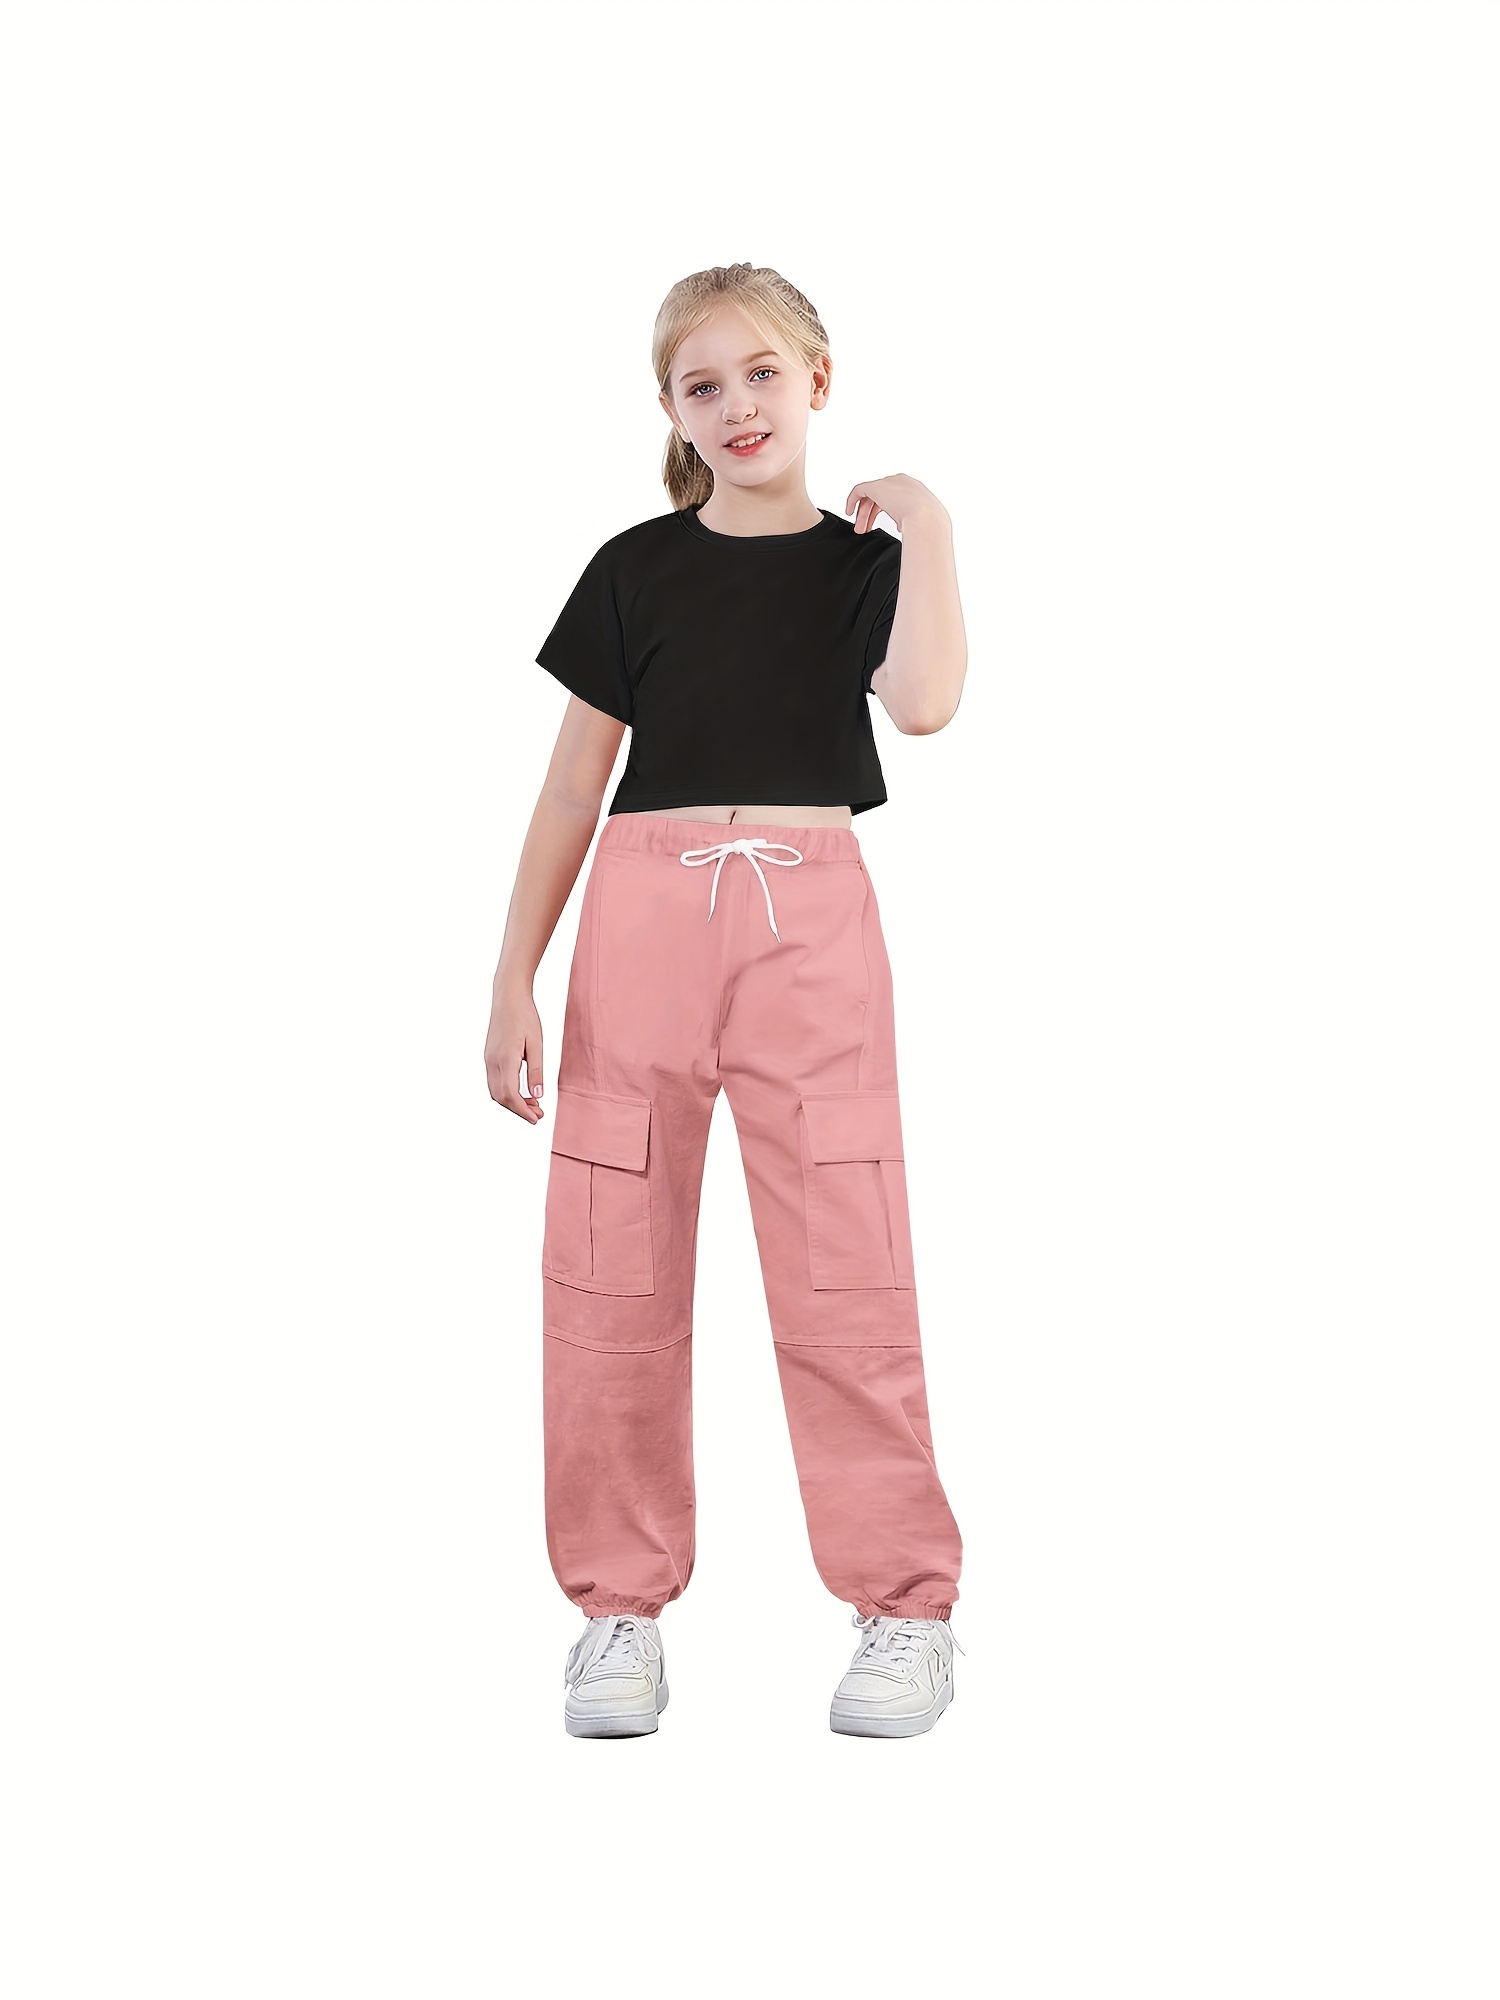  Spring Summer Autumn Black Short Sleeve Round Neck Drawstring  Top+Pants Girls' Fashion Casual Two Girls Shirts Size 8: Clothing, Shoes &  Jewelry